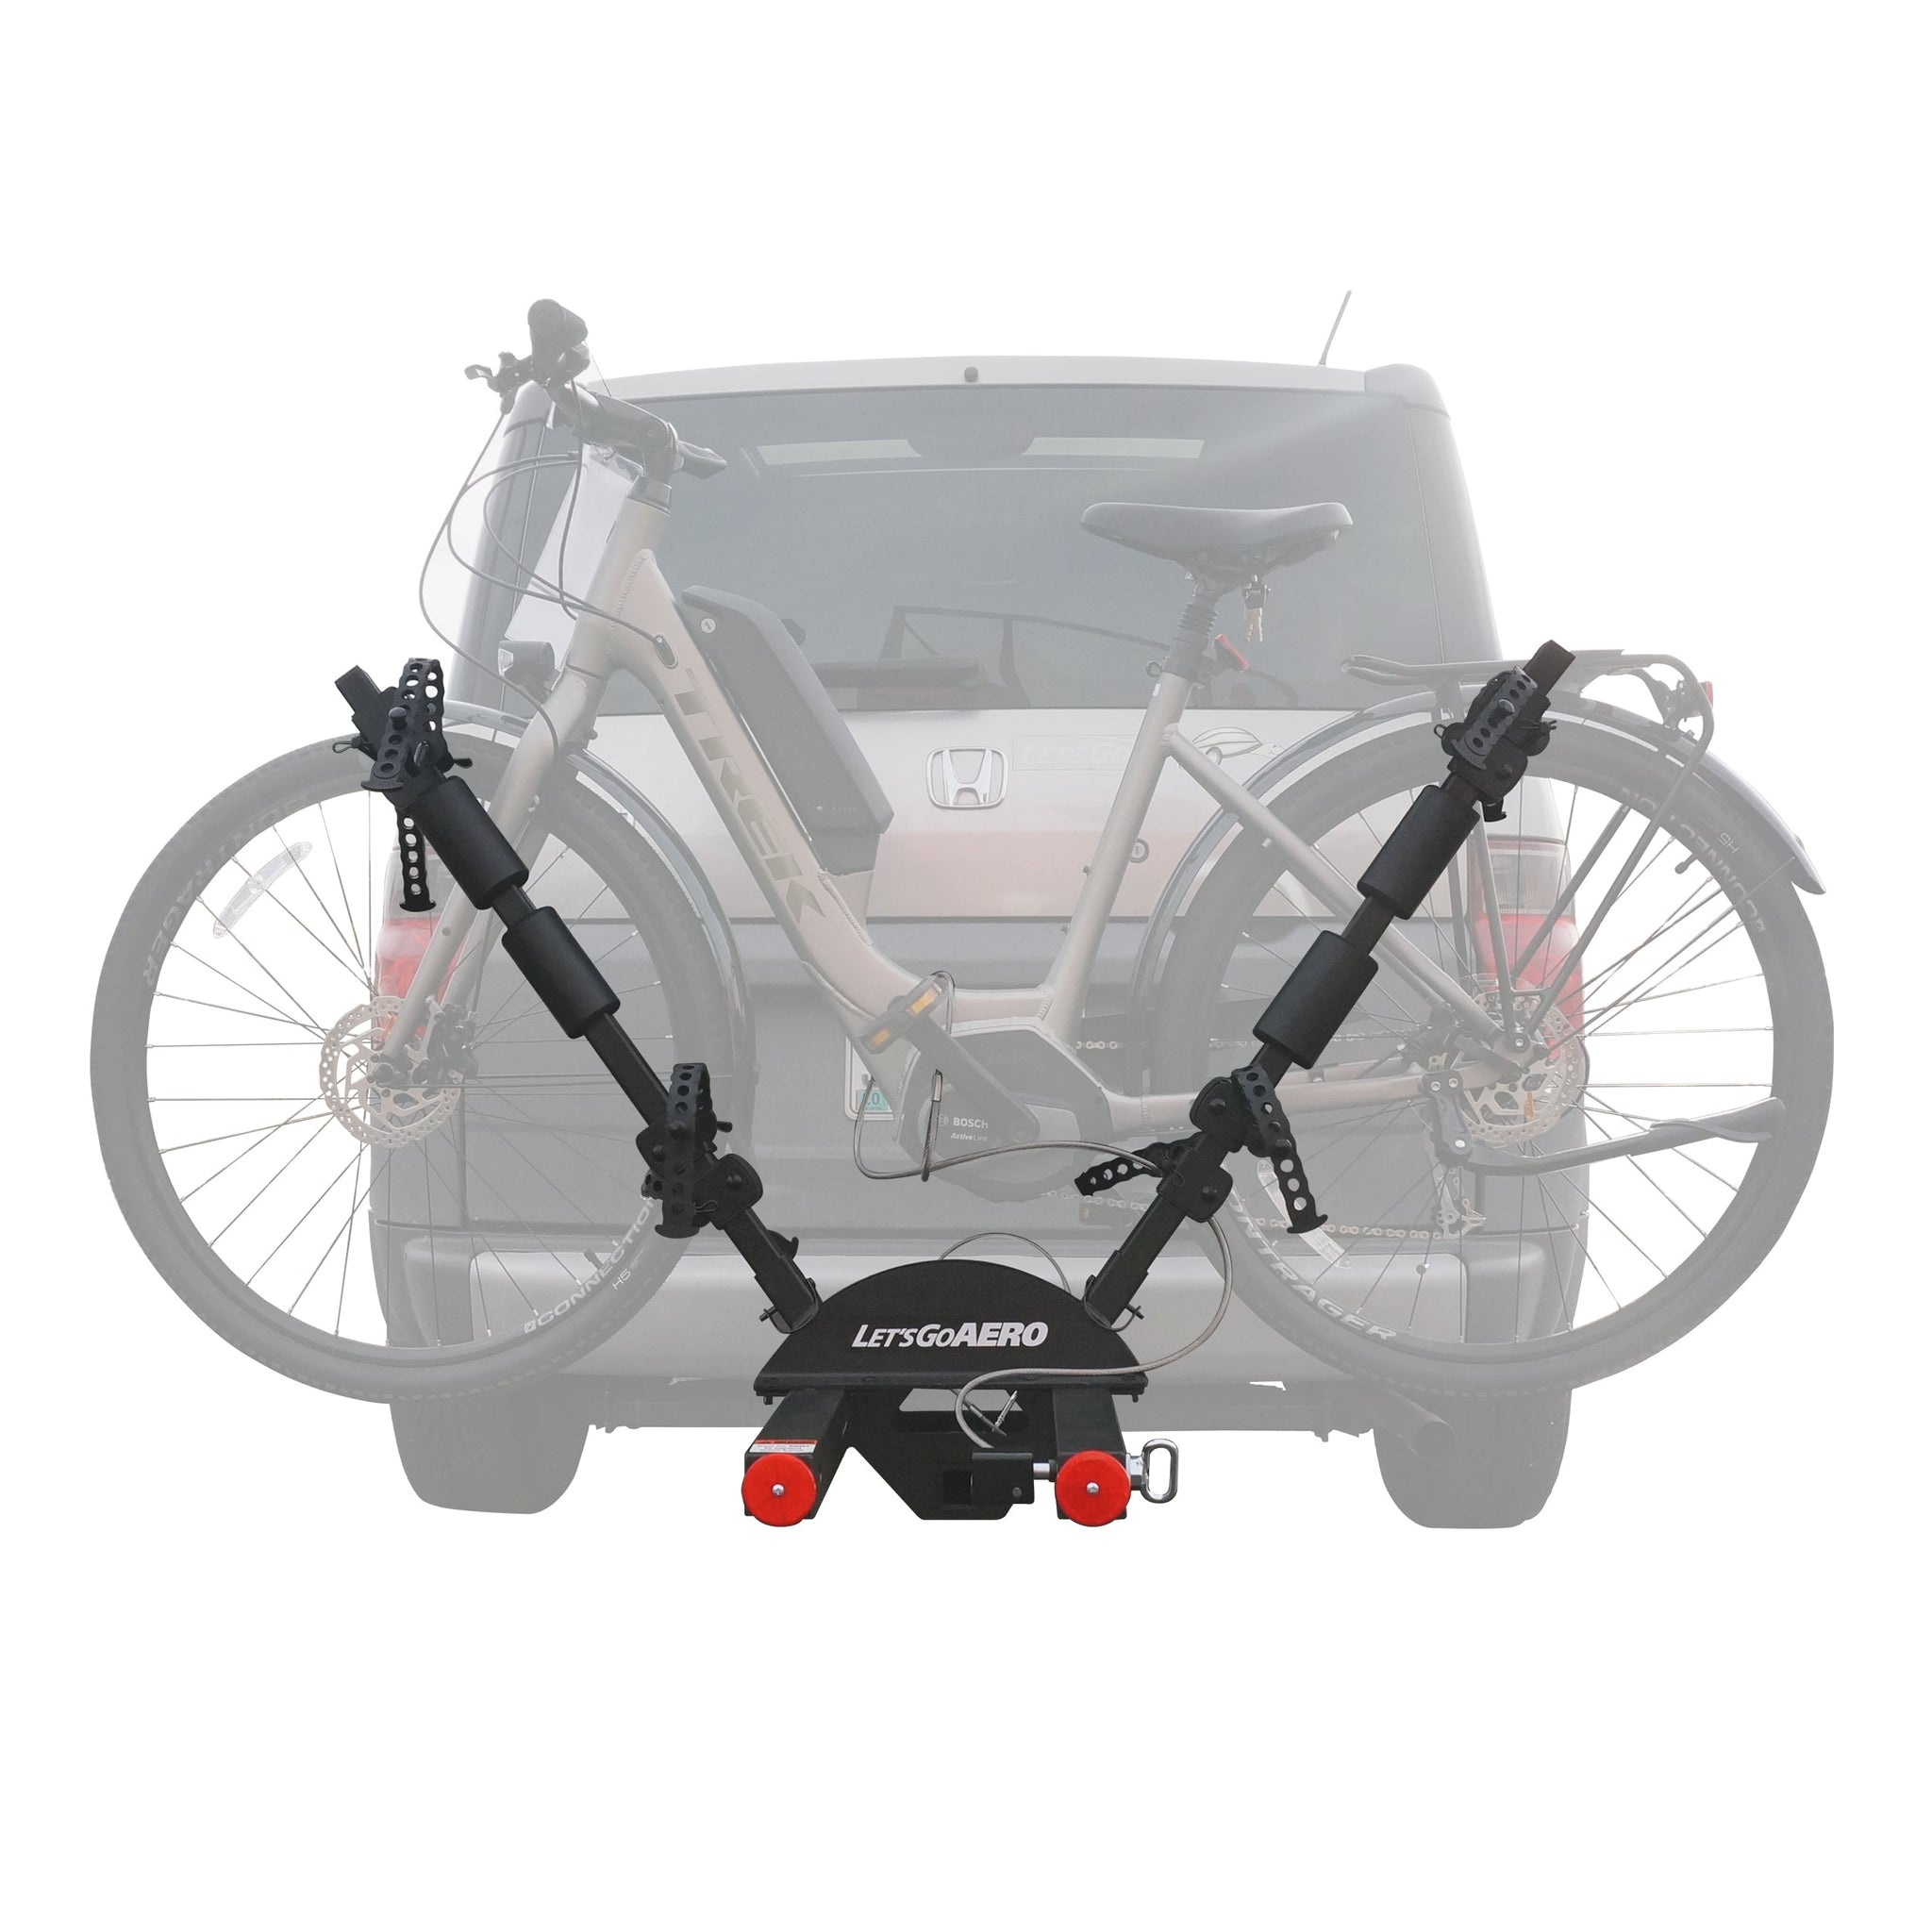 V-Lectric™ PRO 3.0 Slideout Two Bike Carrier